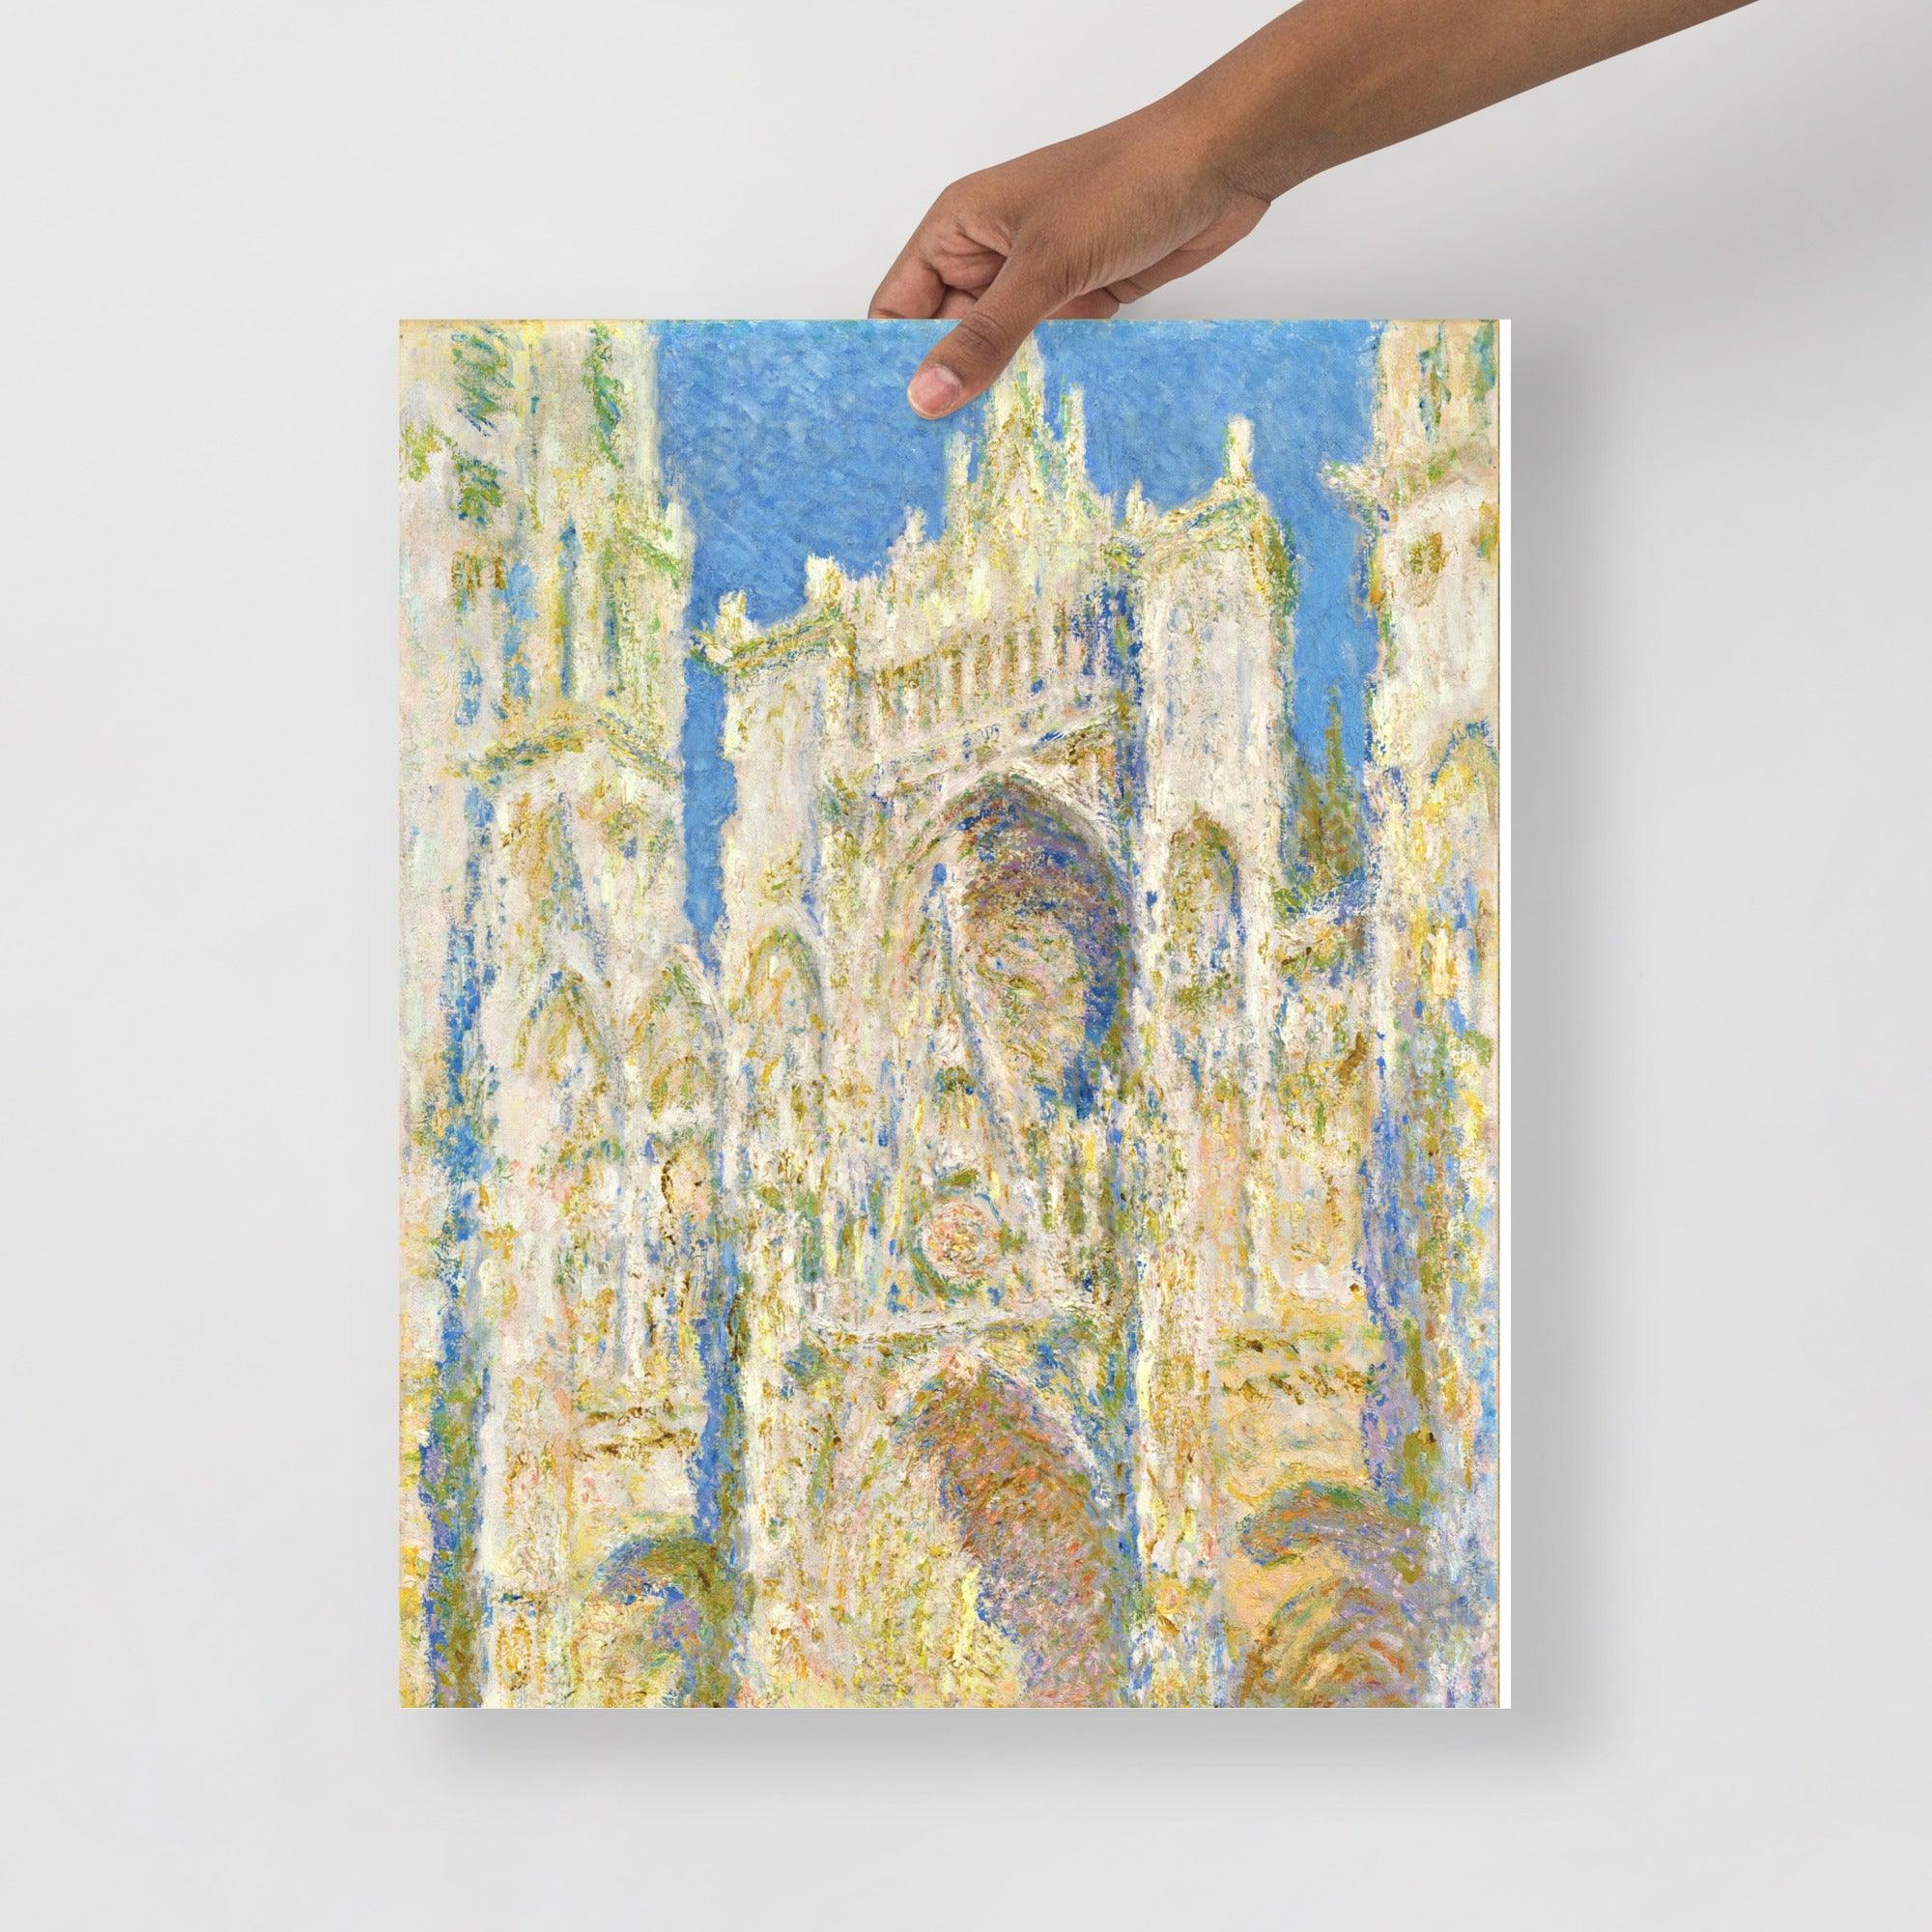 A Rouen Cathedral, West Facade by Claude Monet poster on a plain backdrop in size 16x20”.